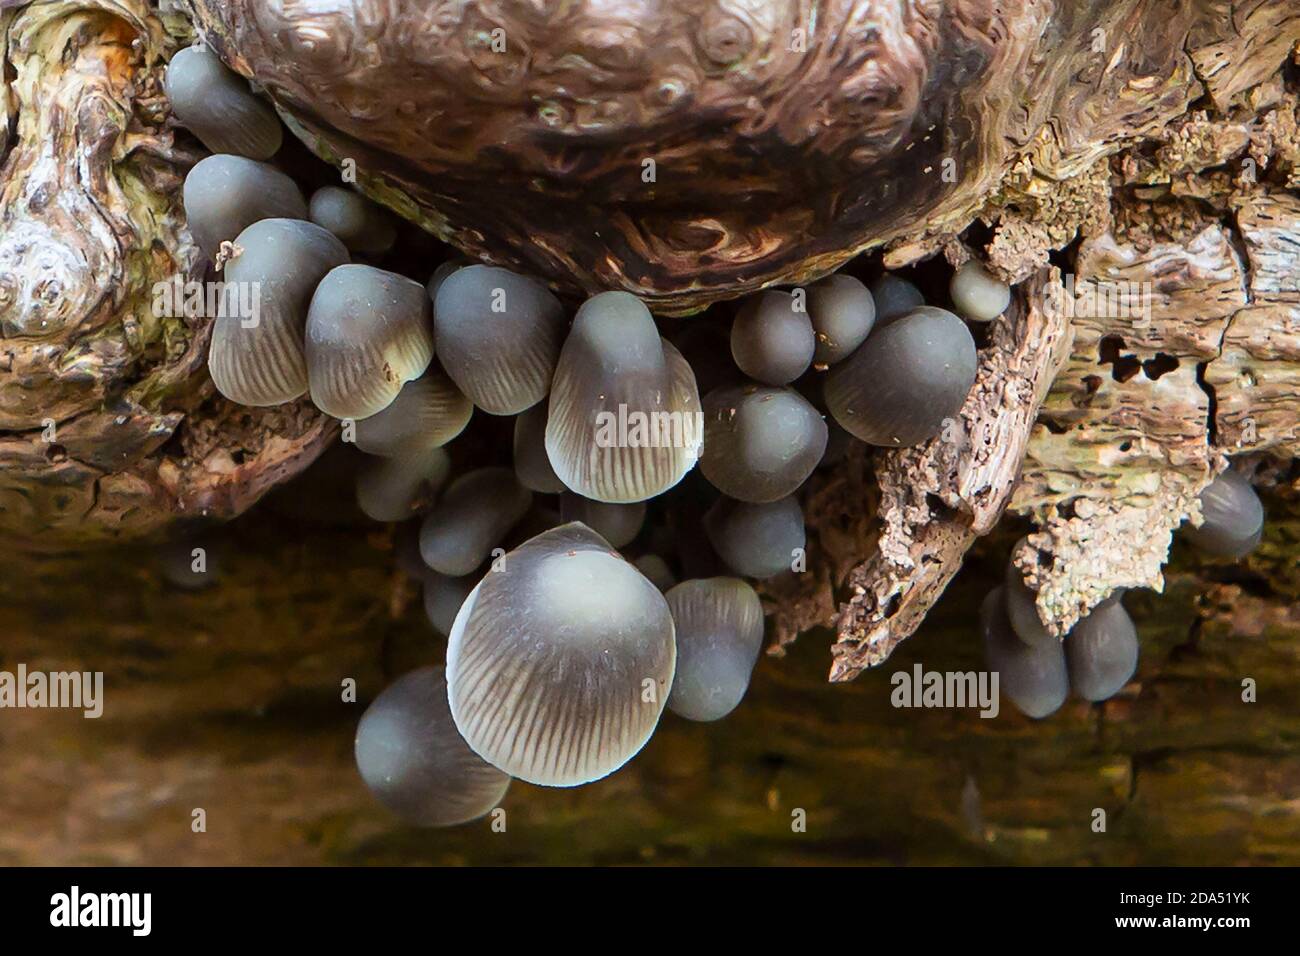 Cluster of mushrooms on a tree trunk Stock Photo